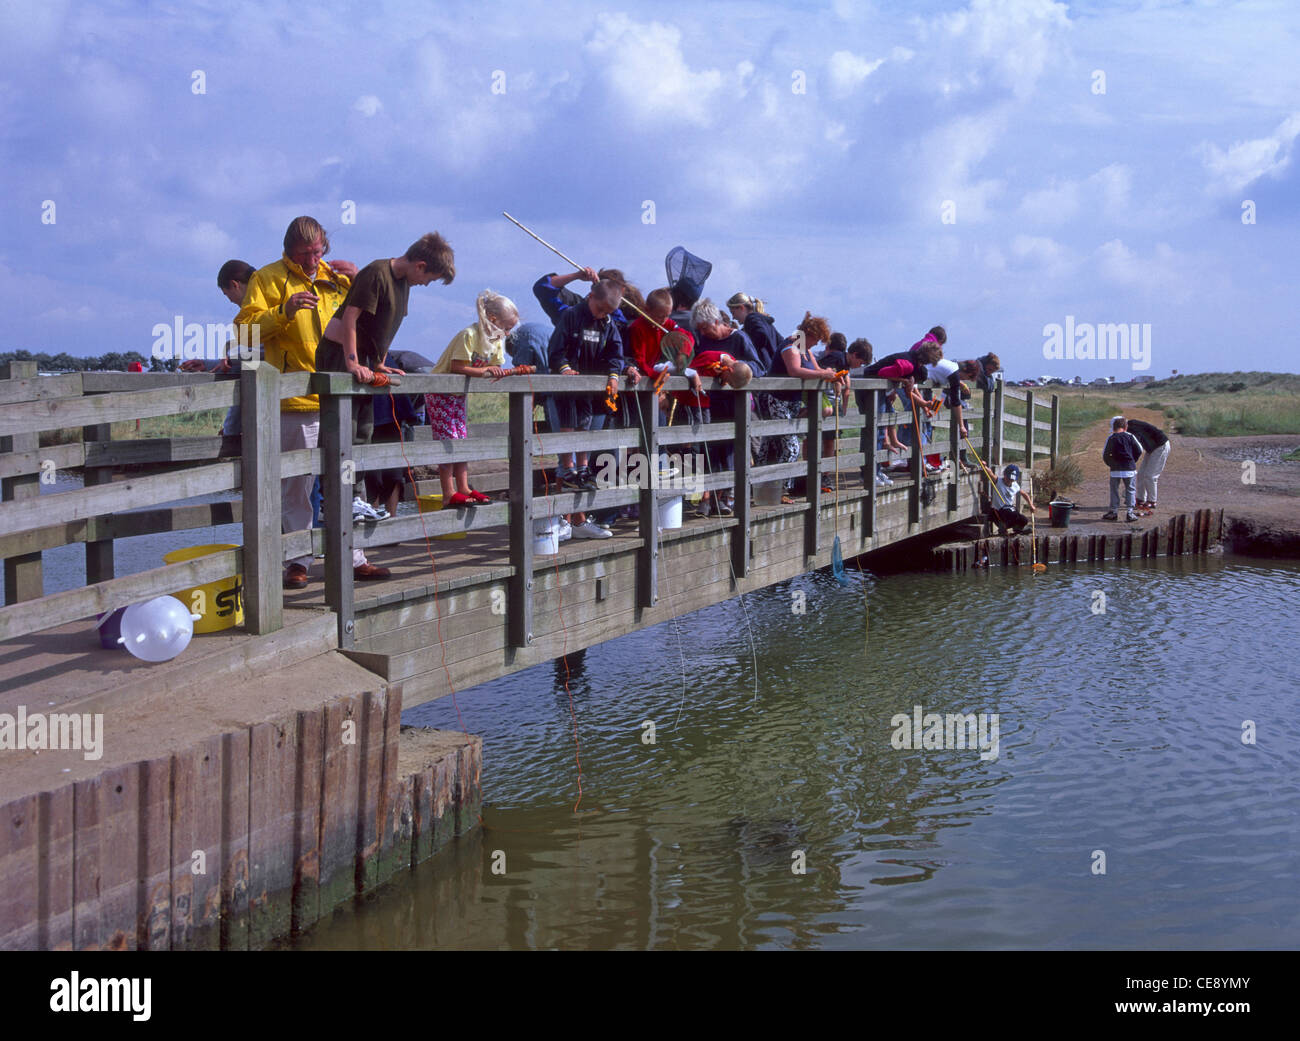 https://c8.alamy.com/comp/CE8YMY/rods-hooks-fishing-nets-in-use-children-playing-catching-crab-at-popular-CE8YMY.jpg